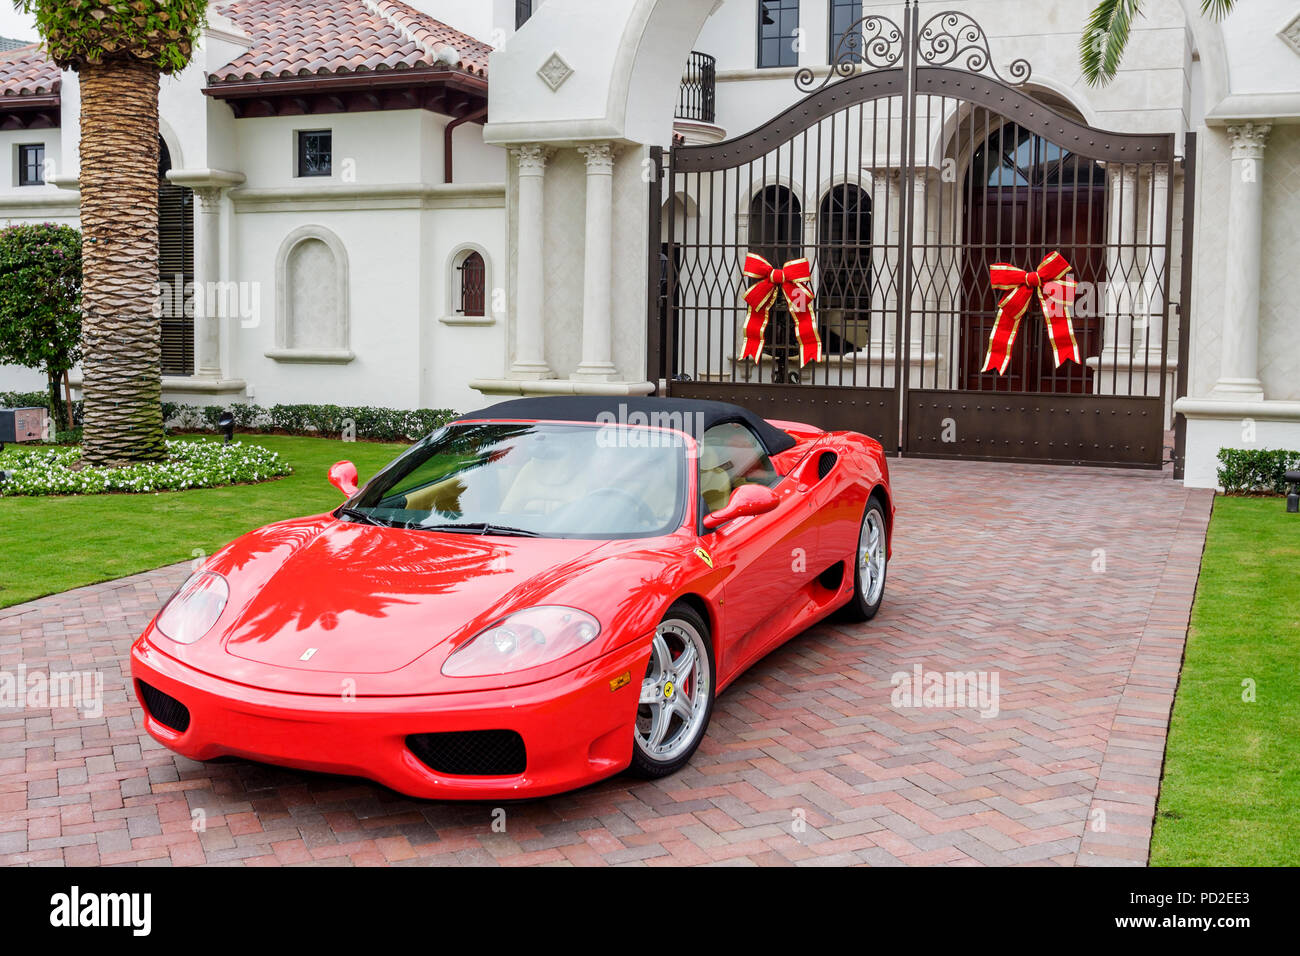 Boca Raton Florida,Royal Palm,upscale upper income,house residence mansion home driveway,Christmas decorations red Ferrari sports car security gate Stock Photo